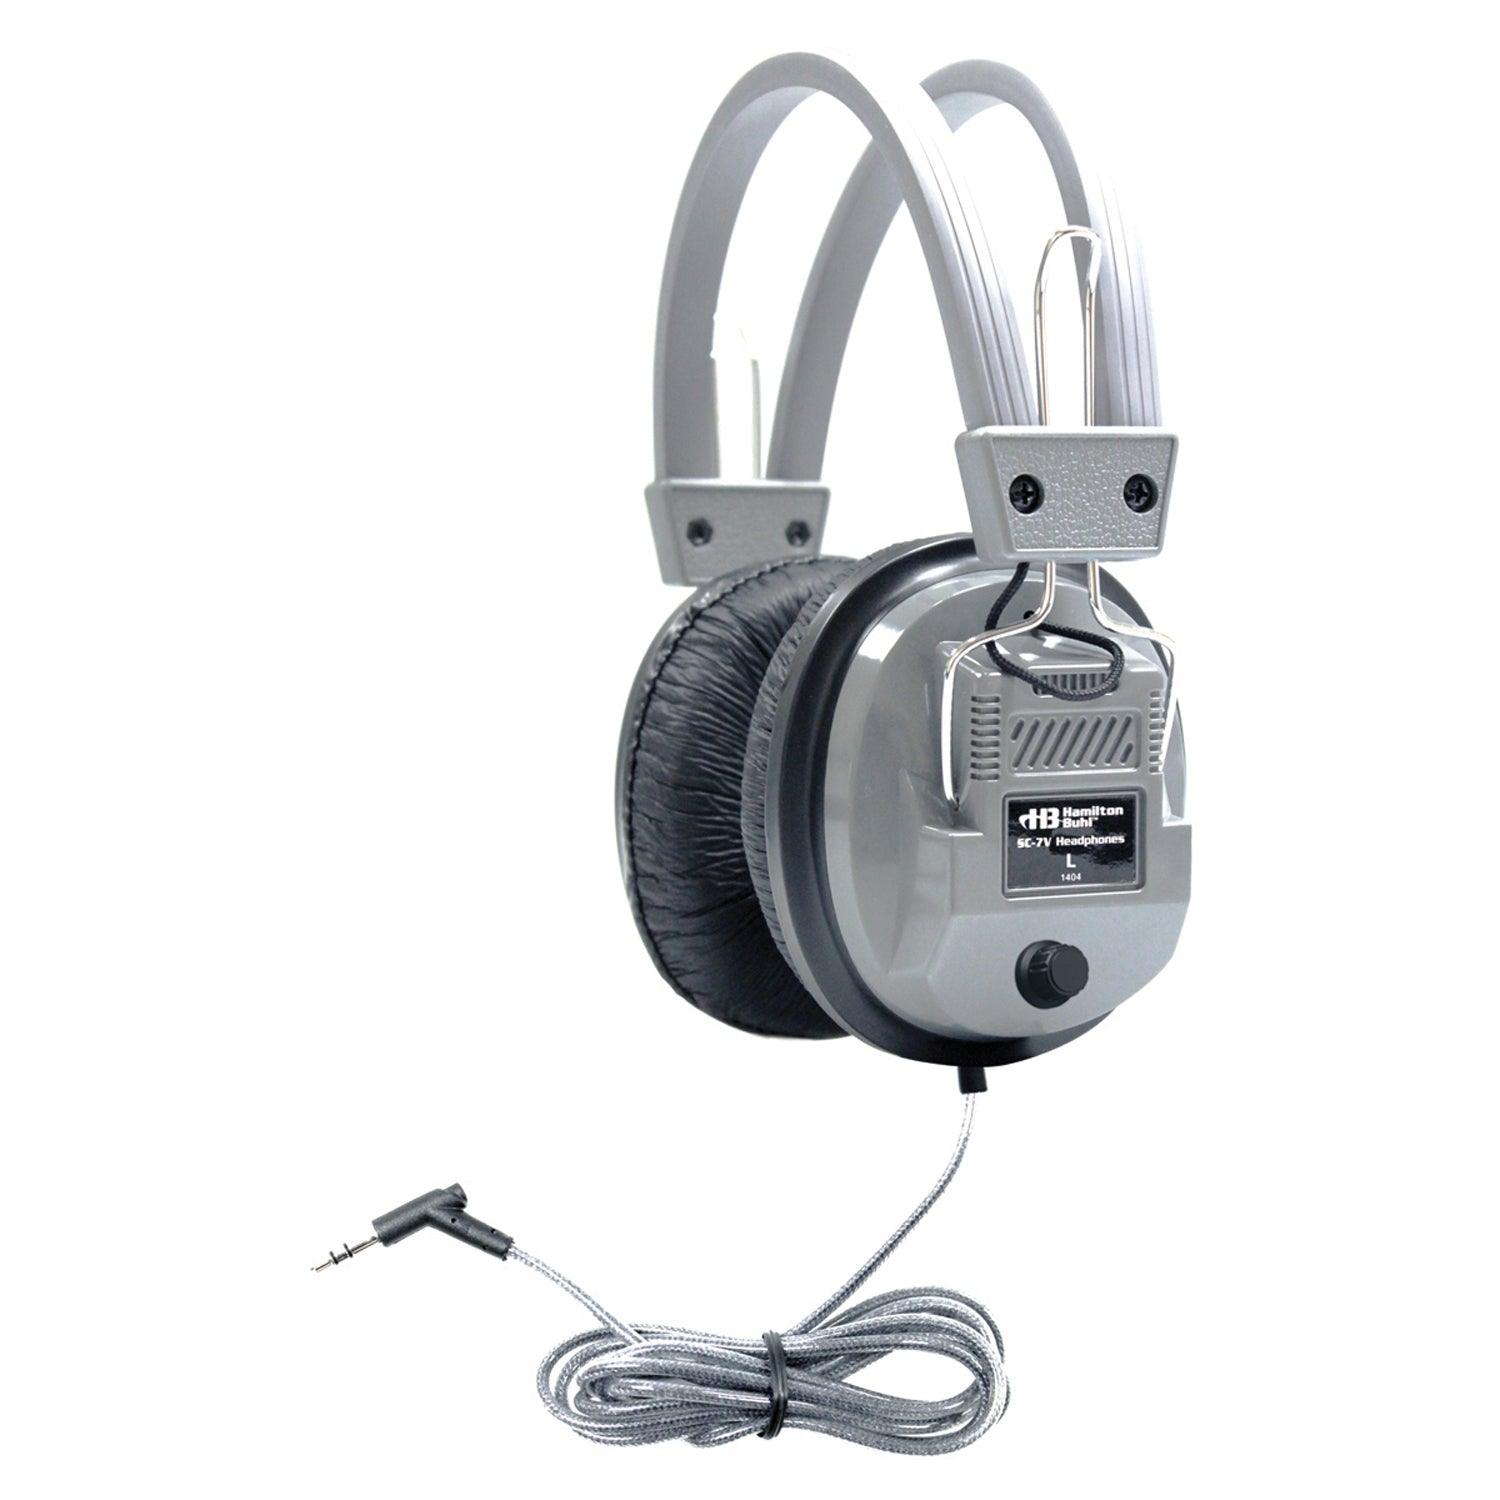 Sack-O-Phones, 5 SC7V Deluxe Headphones with Volume Control in a Carry Bag - Loomini